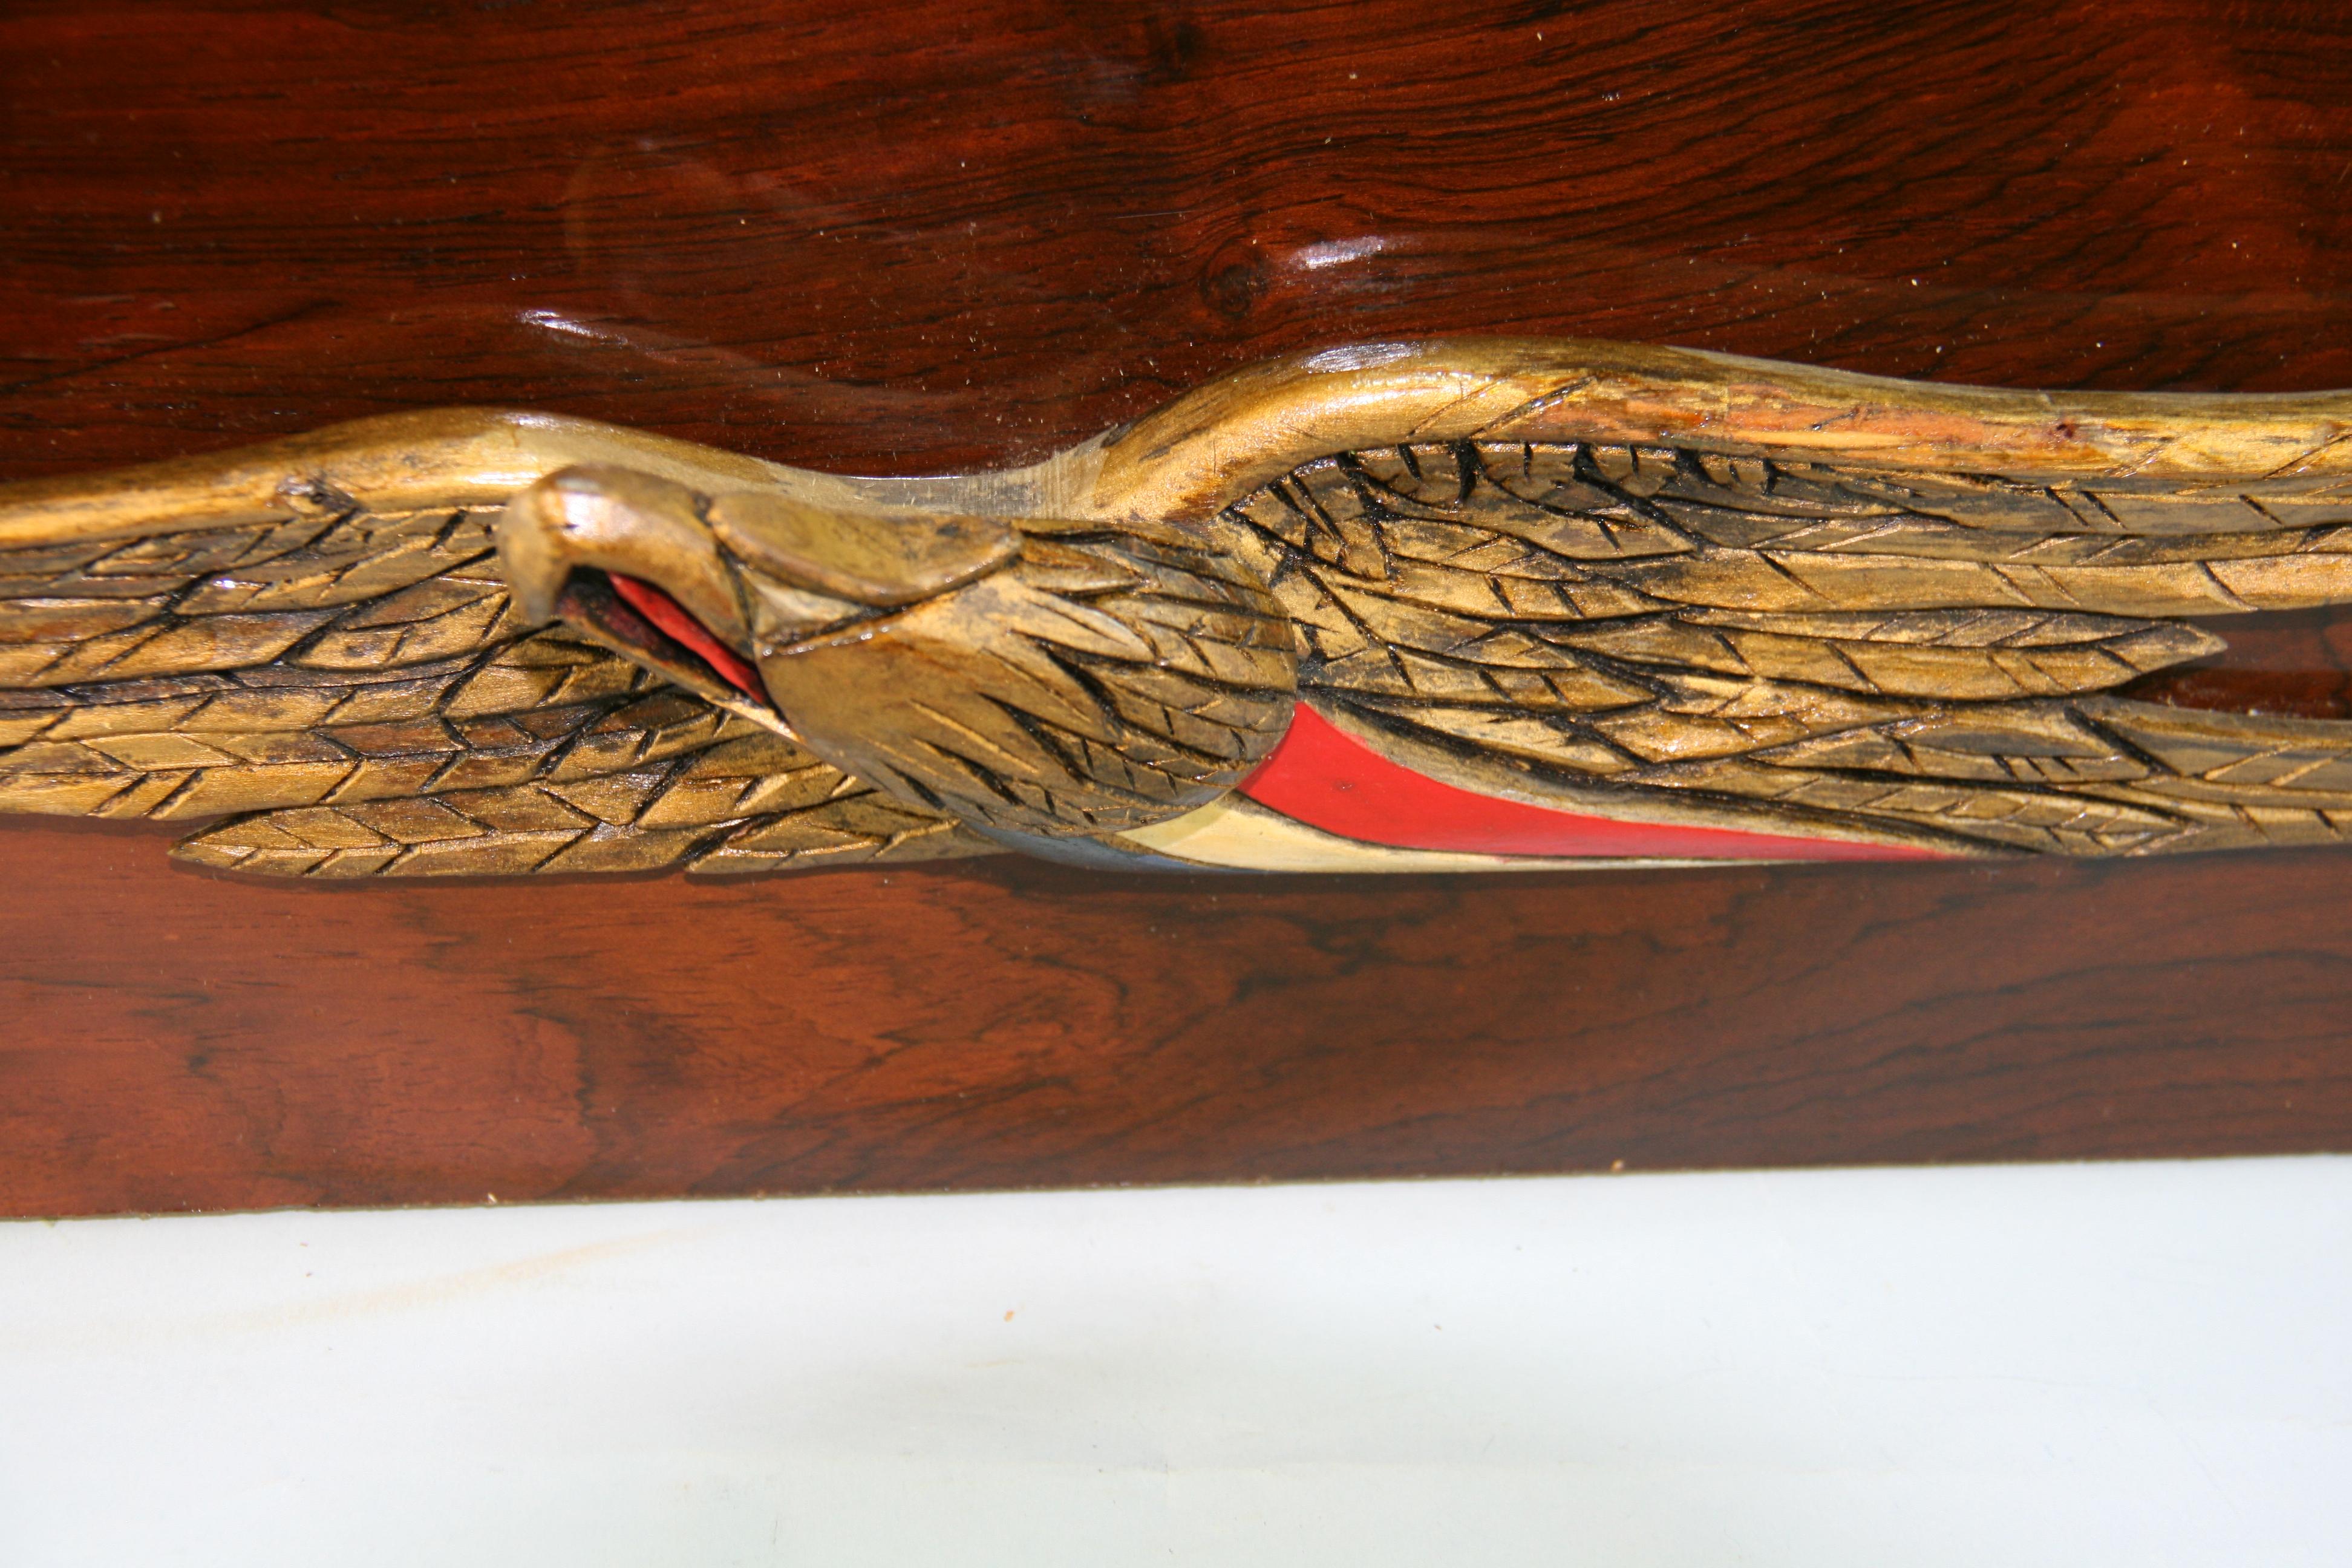 Hand Carved Eagle Wall Sculpture For Sale 2